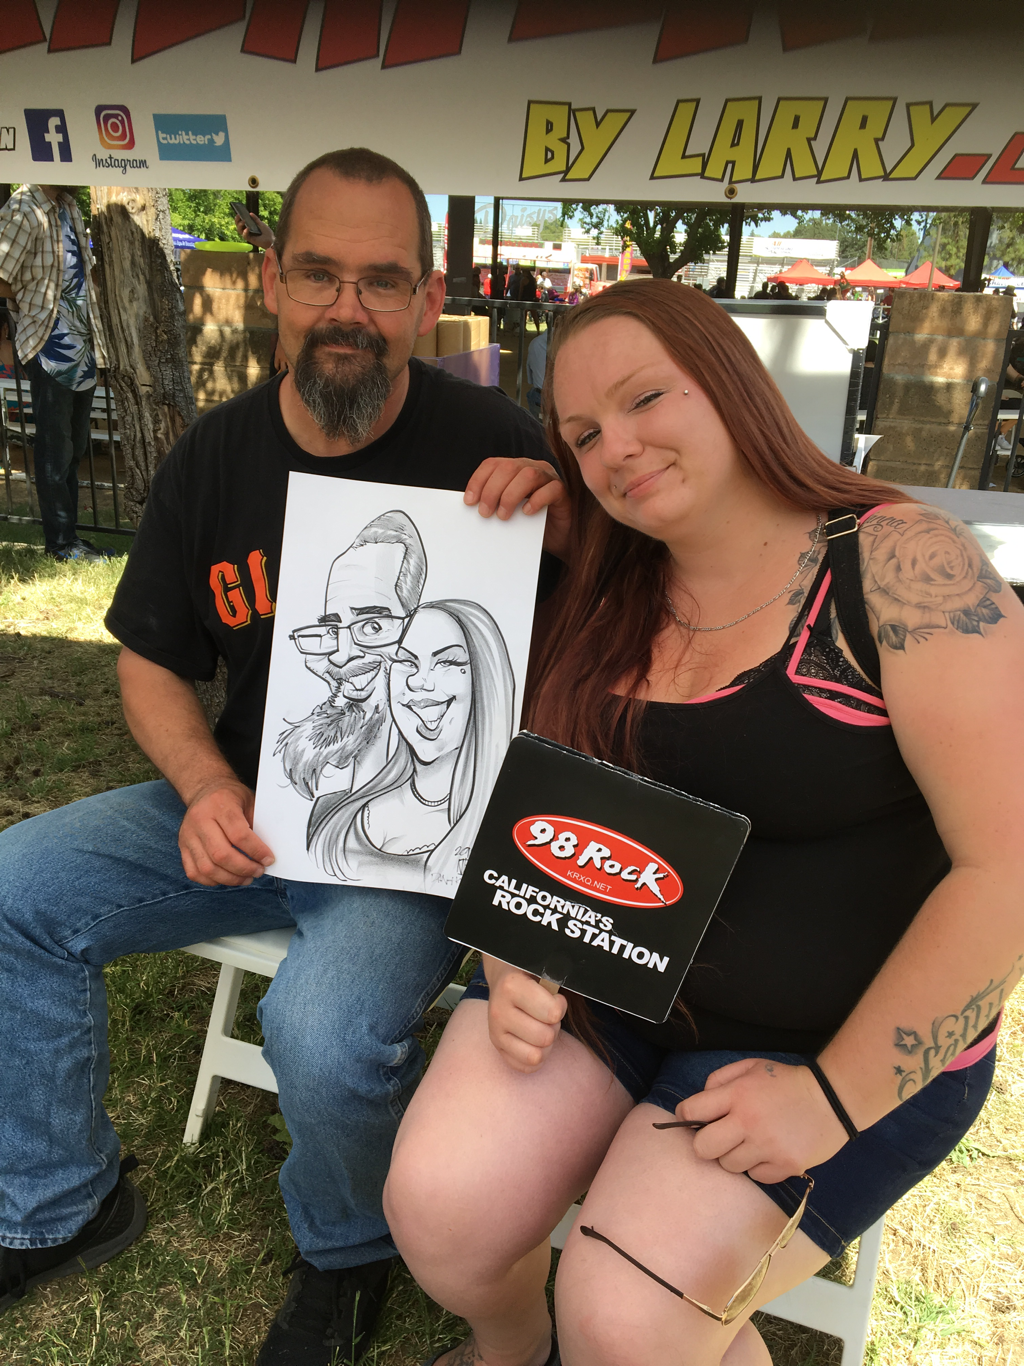 Sacramento caricature artist JAGuerzon entertains guests in the summer heat with cartoons and laughs in Roseville, California.